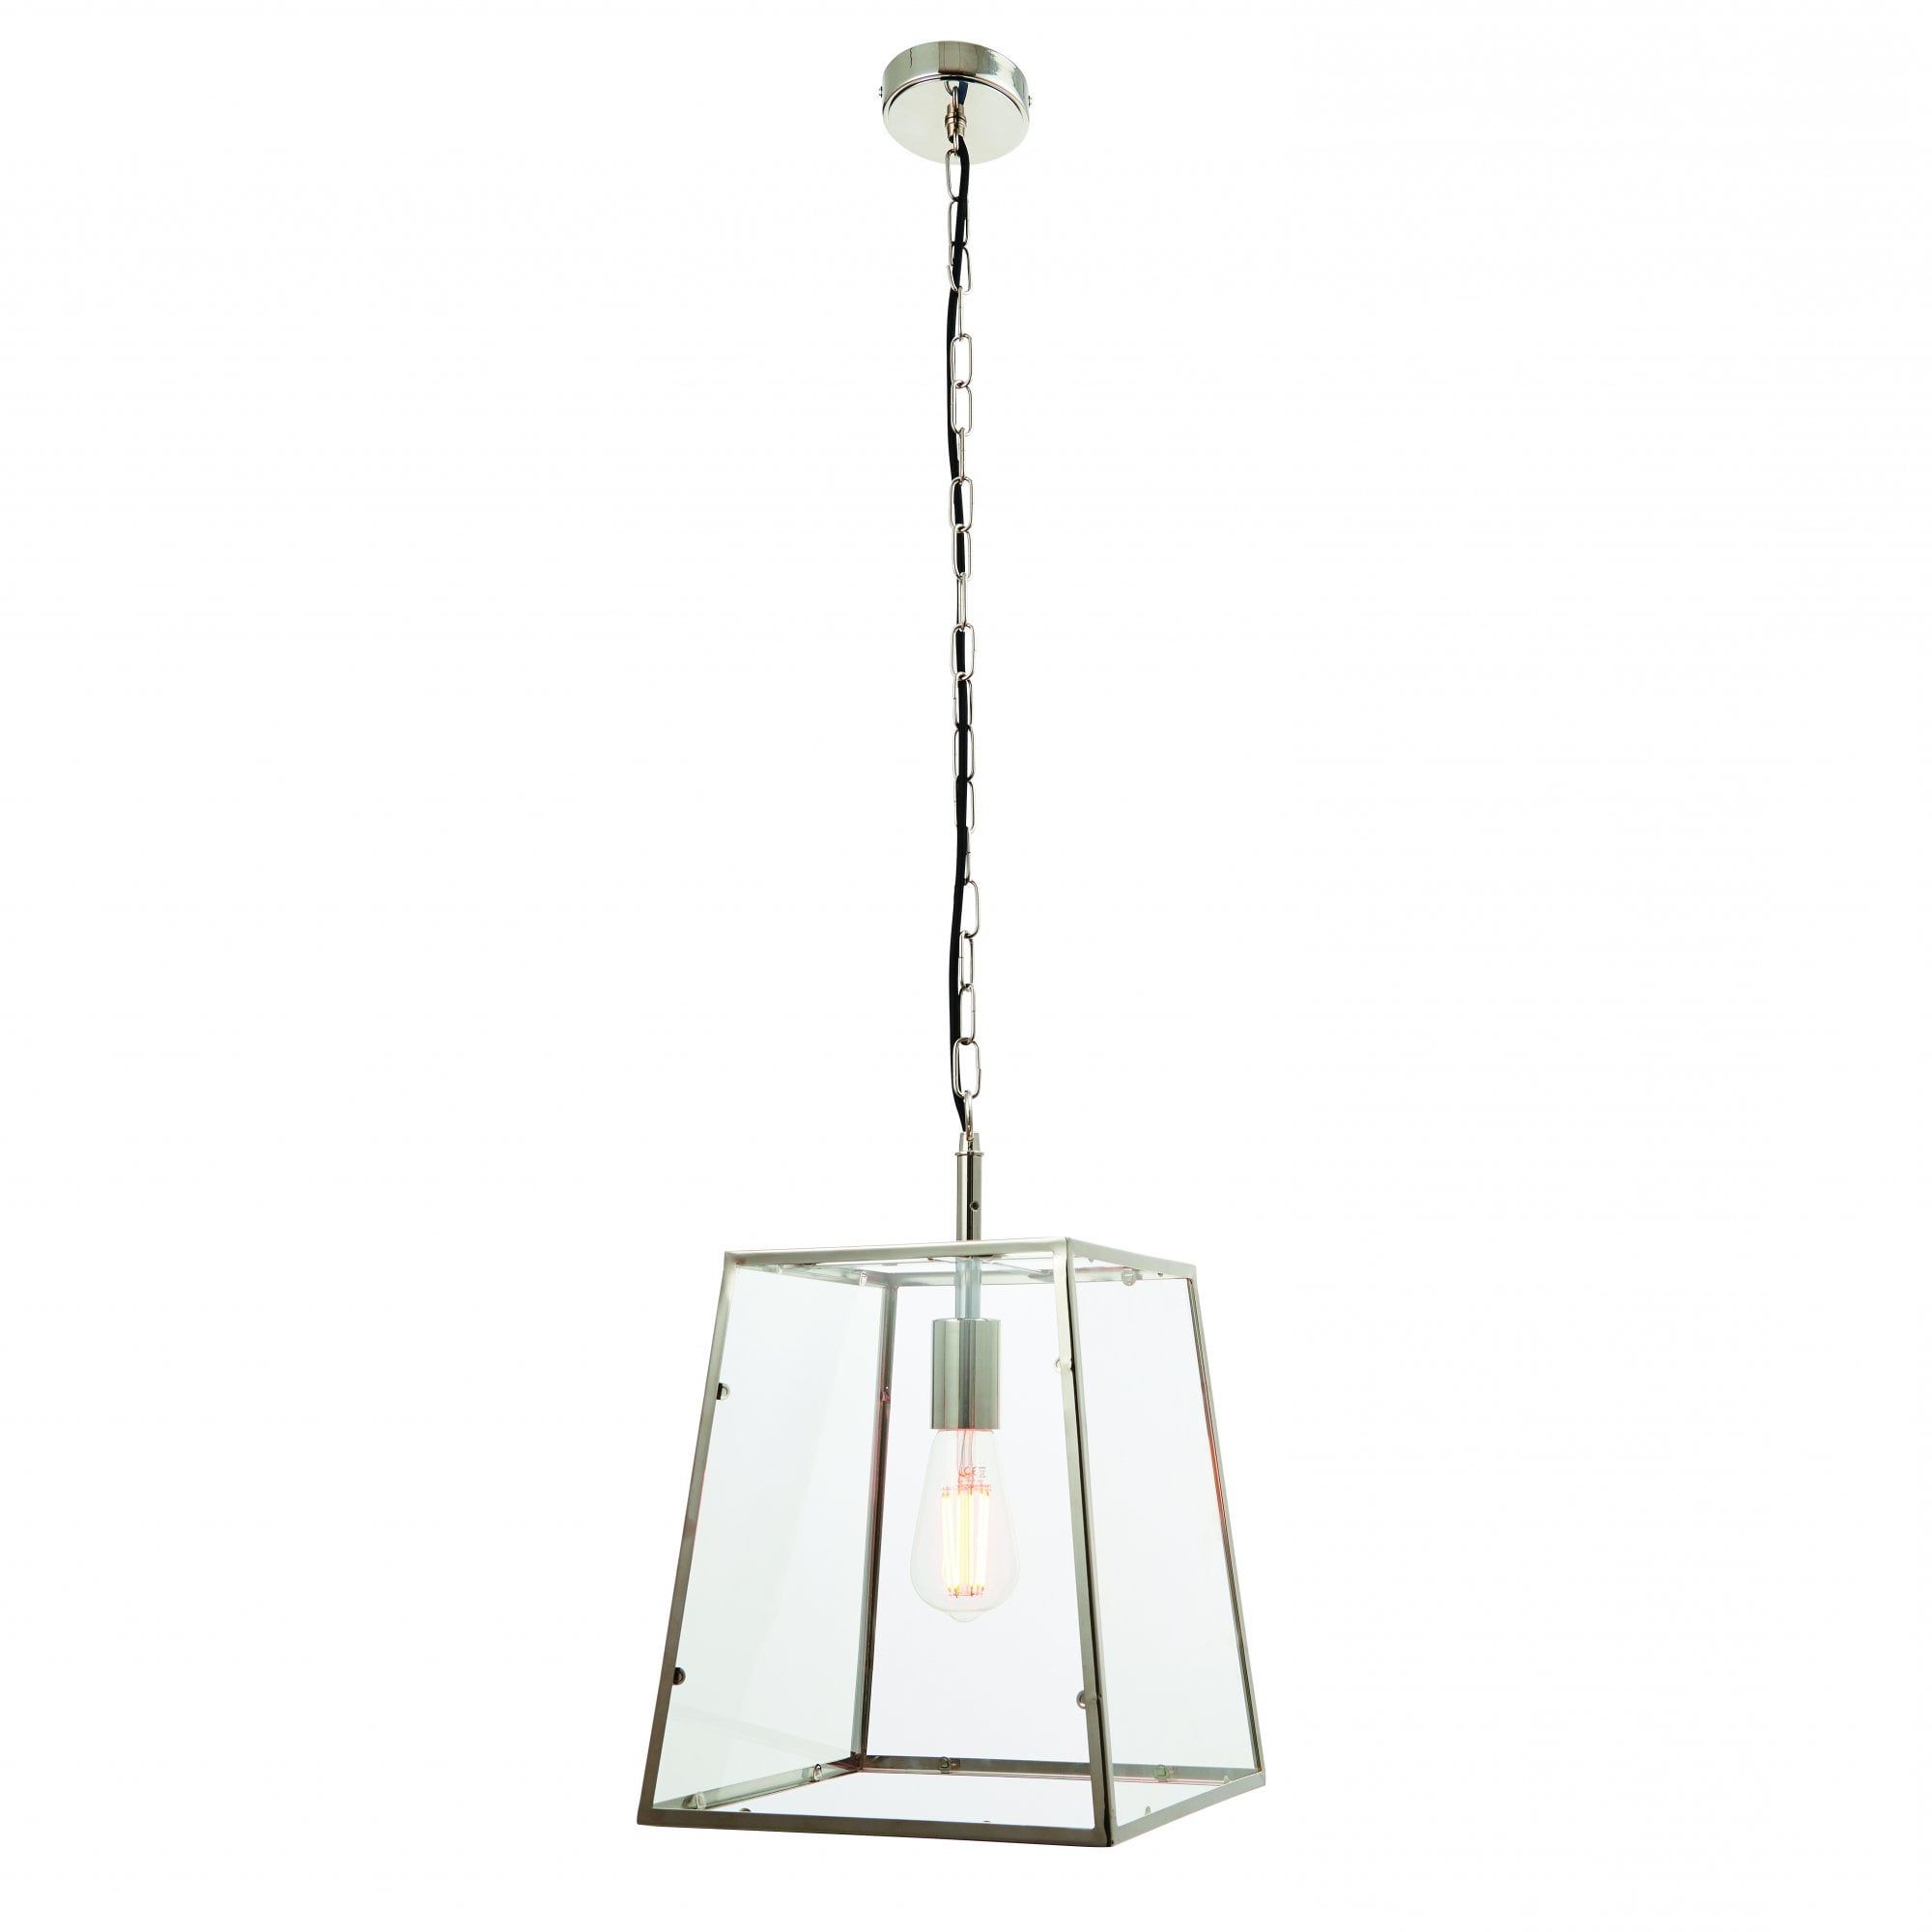 Lantern Chandeliers With Clear Glass Throughout Popular Ceiling Lantern In Polished Nickel With Clear Glass (View 5 of 15)